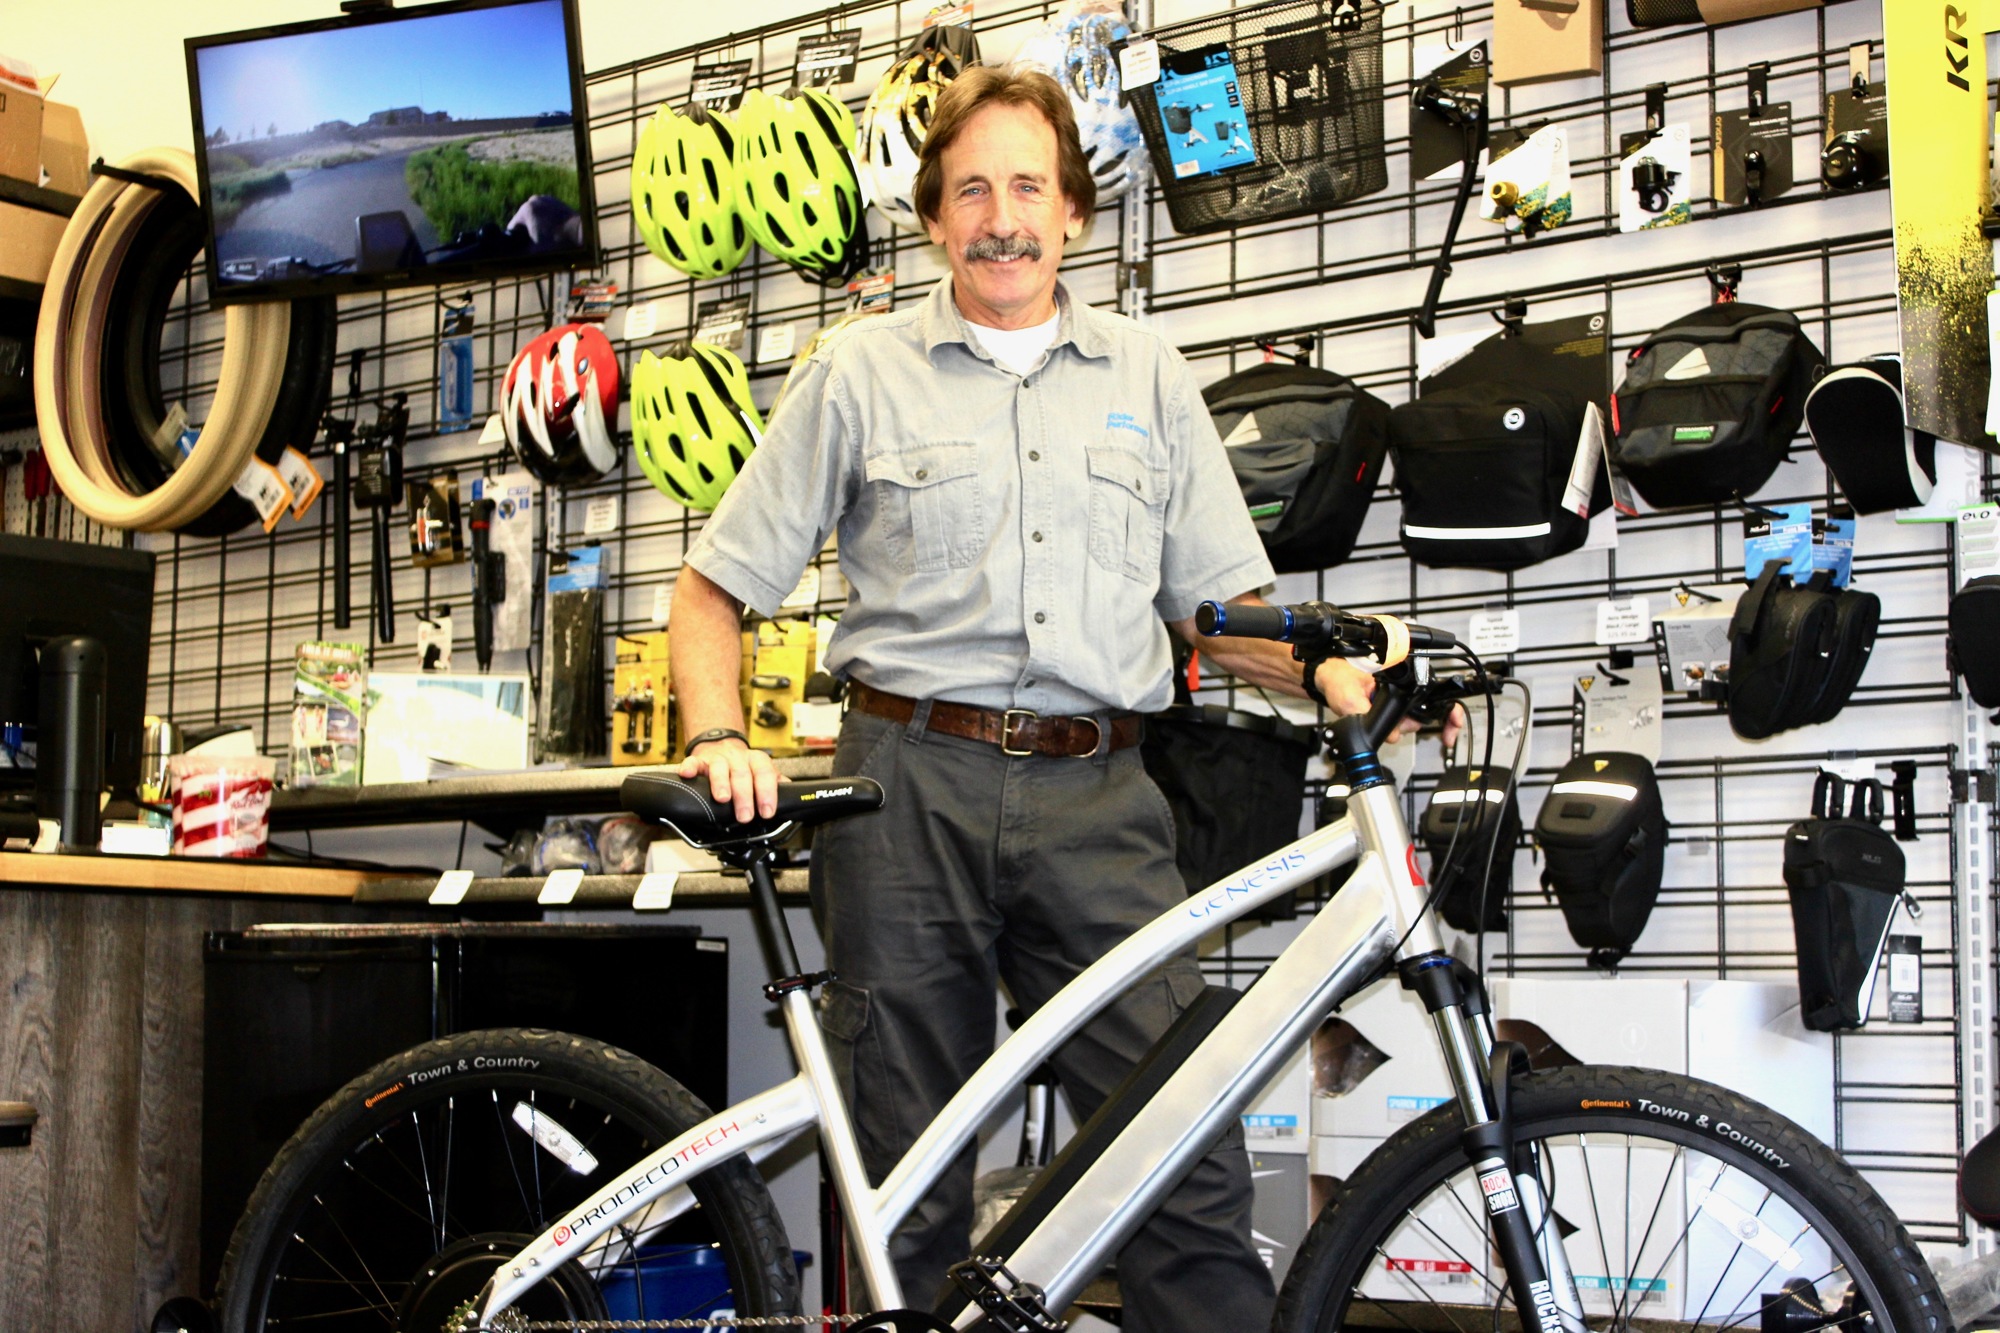 Mark Goettsch, the owner of Rider Performance Group, poses with an e-bike. Photo by Ray Boone